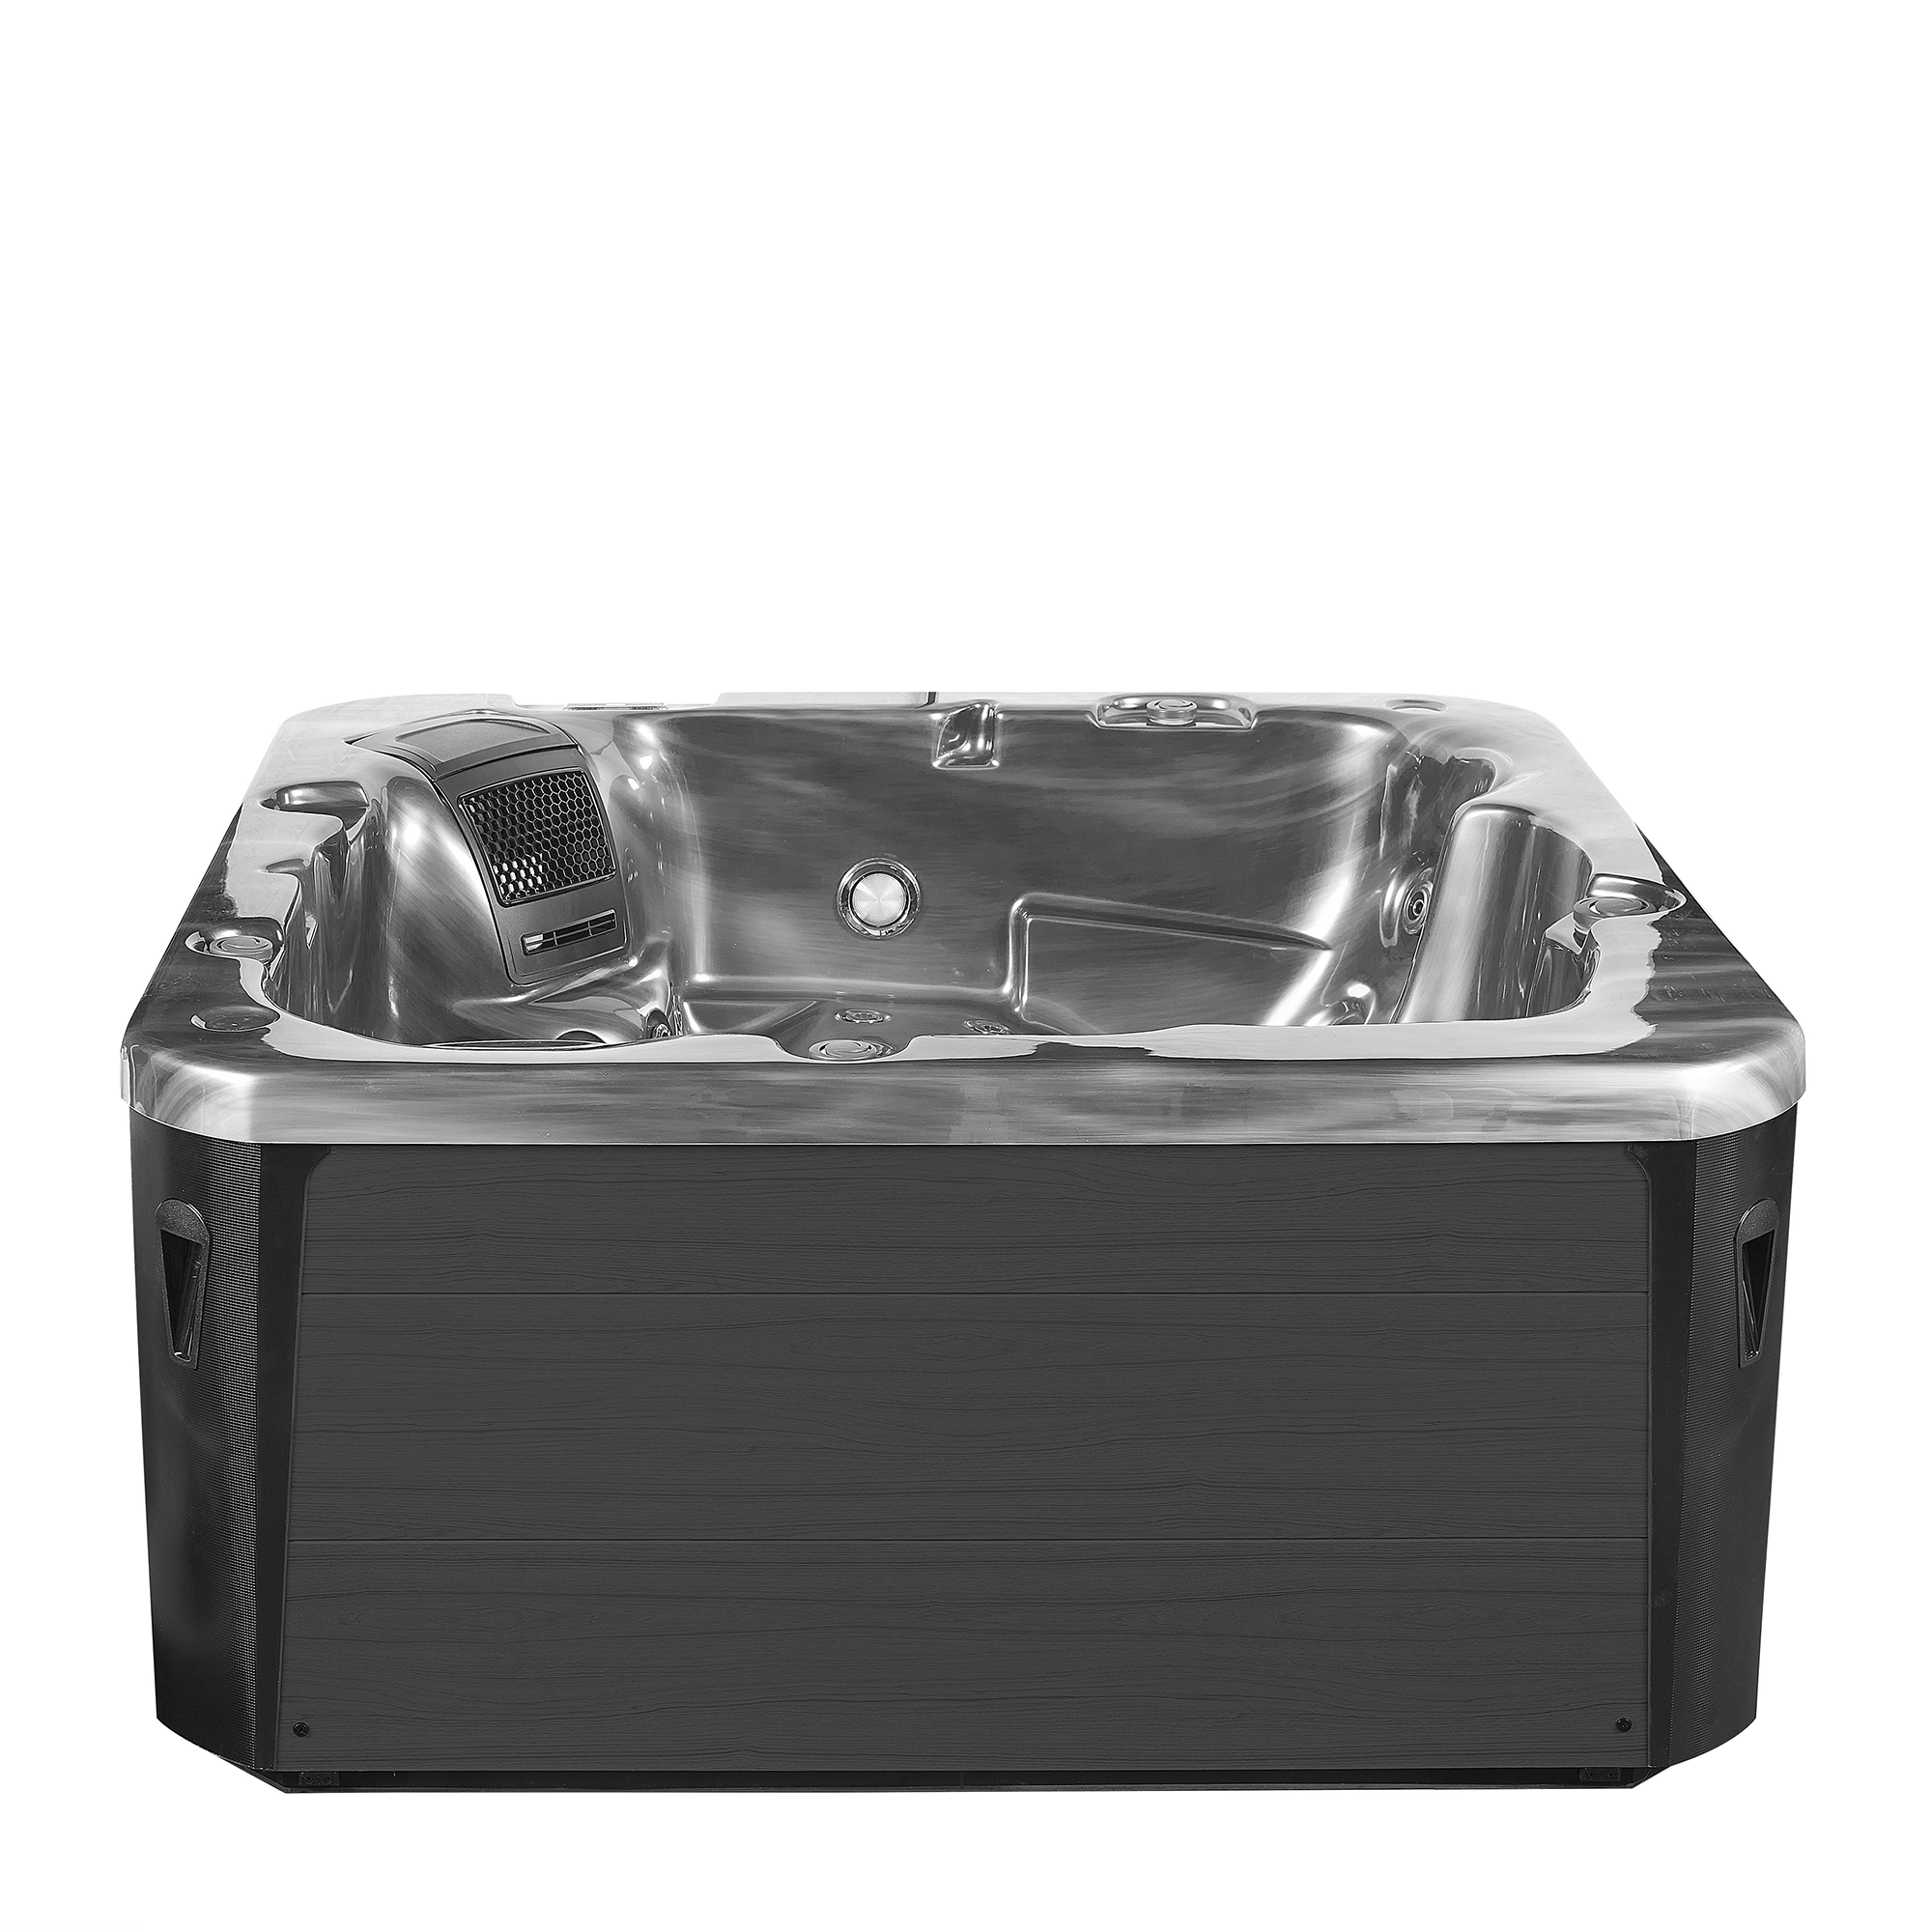 Beliani Hot Tub Silver Acrylic Outdoor 5-Person Tub with Jetstrems LED light Digital Control